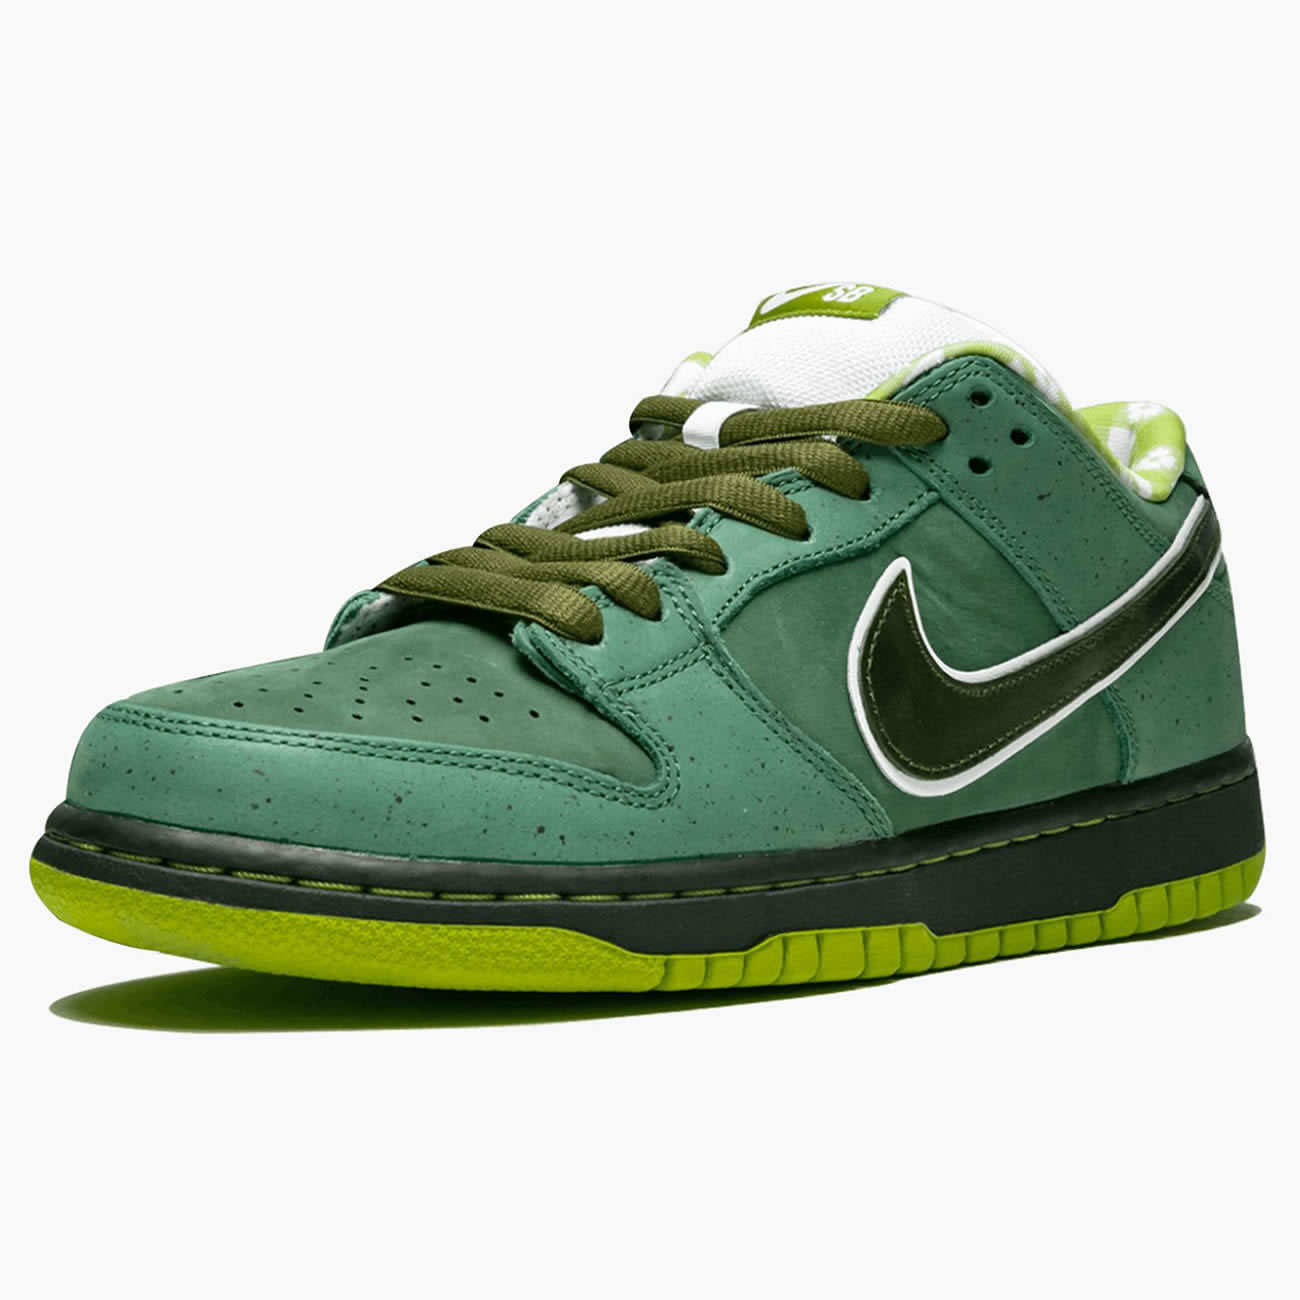 Nike Sb Dunk Low Concepts Green Lobster Bc1310 337 (4) - newkick.org